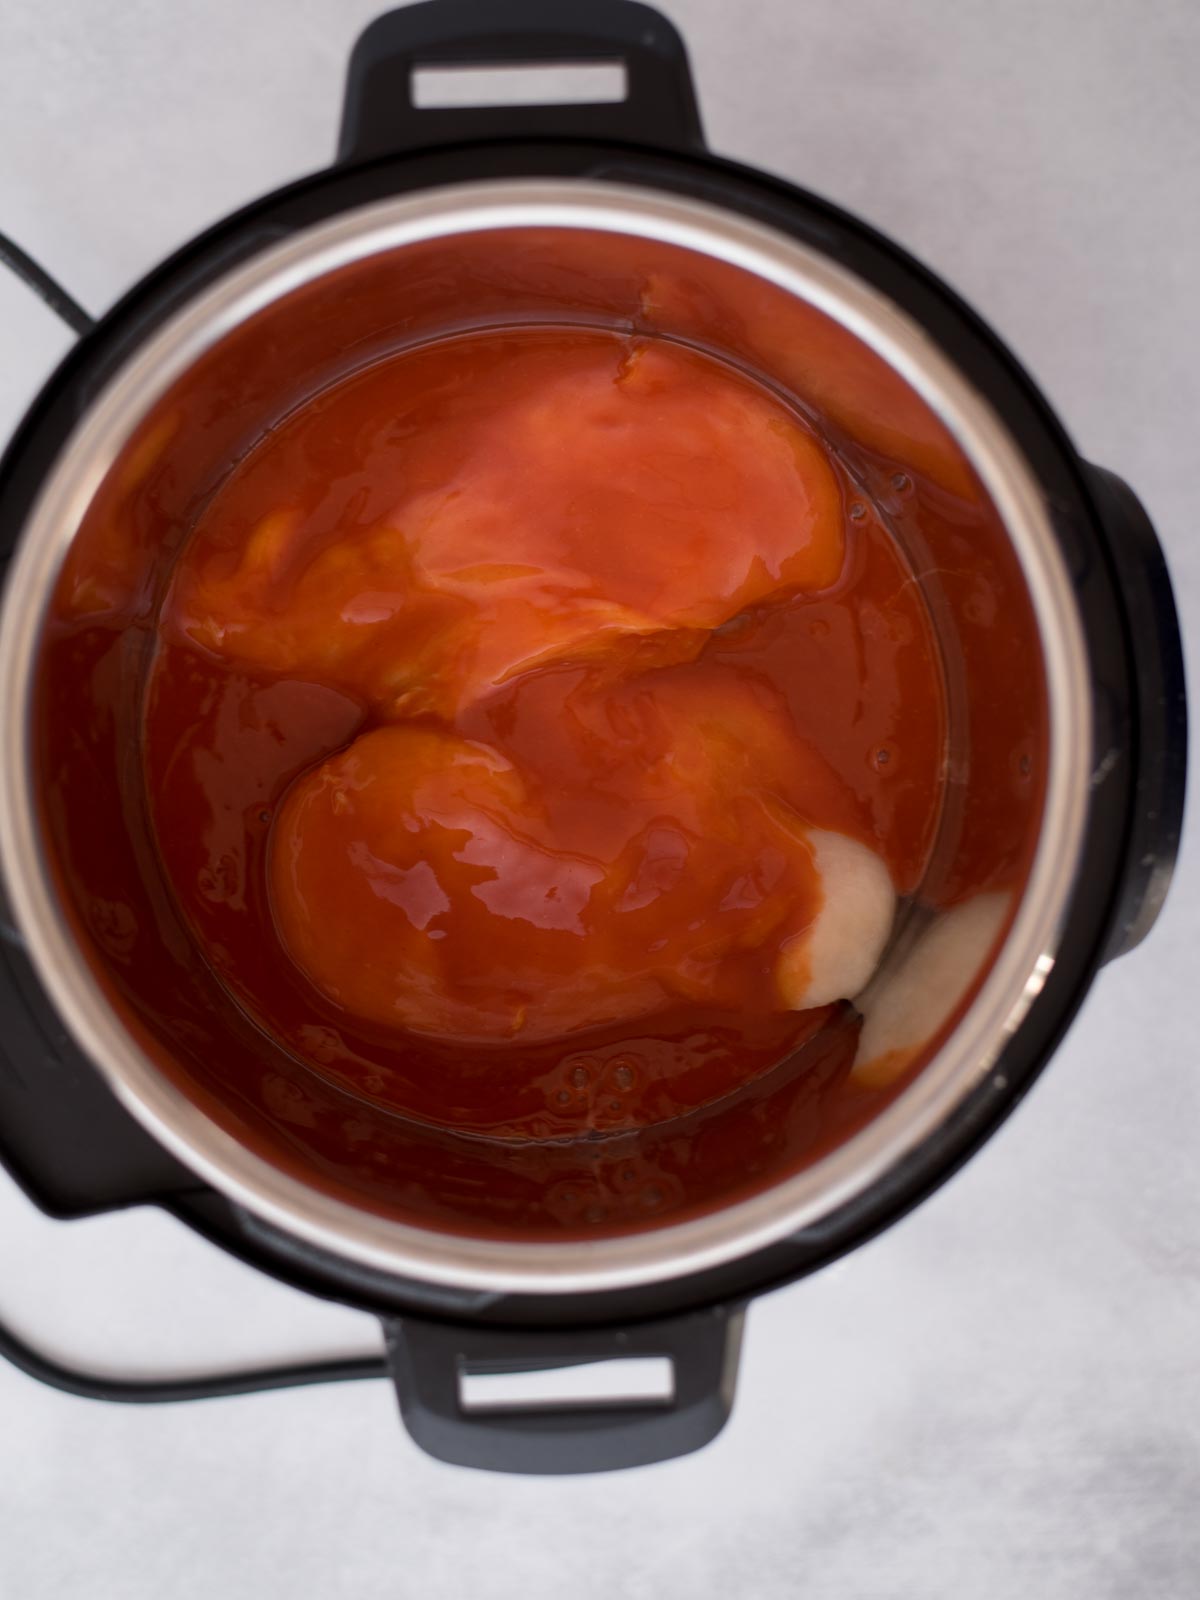 Buffalo sauce and raw chicken breasts inside the instant pot ready to cook.